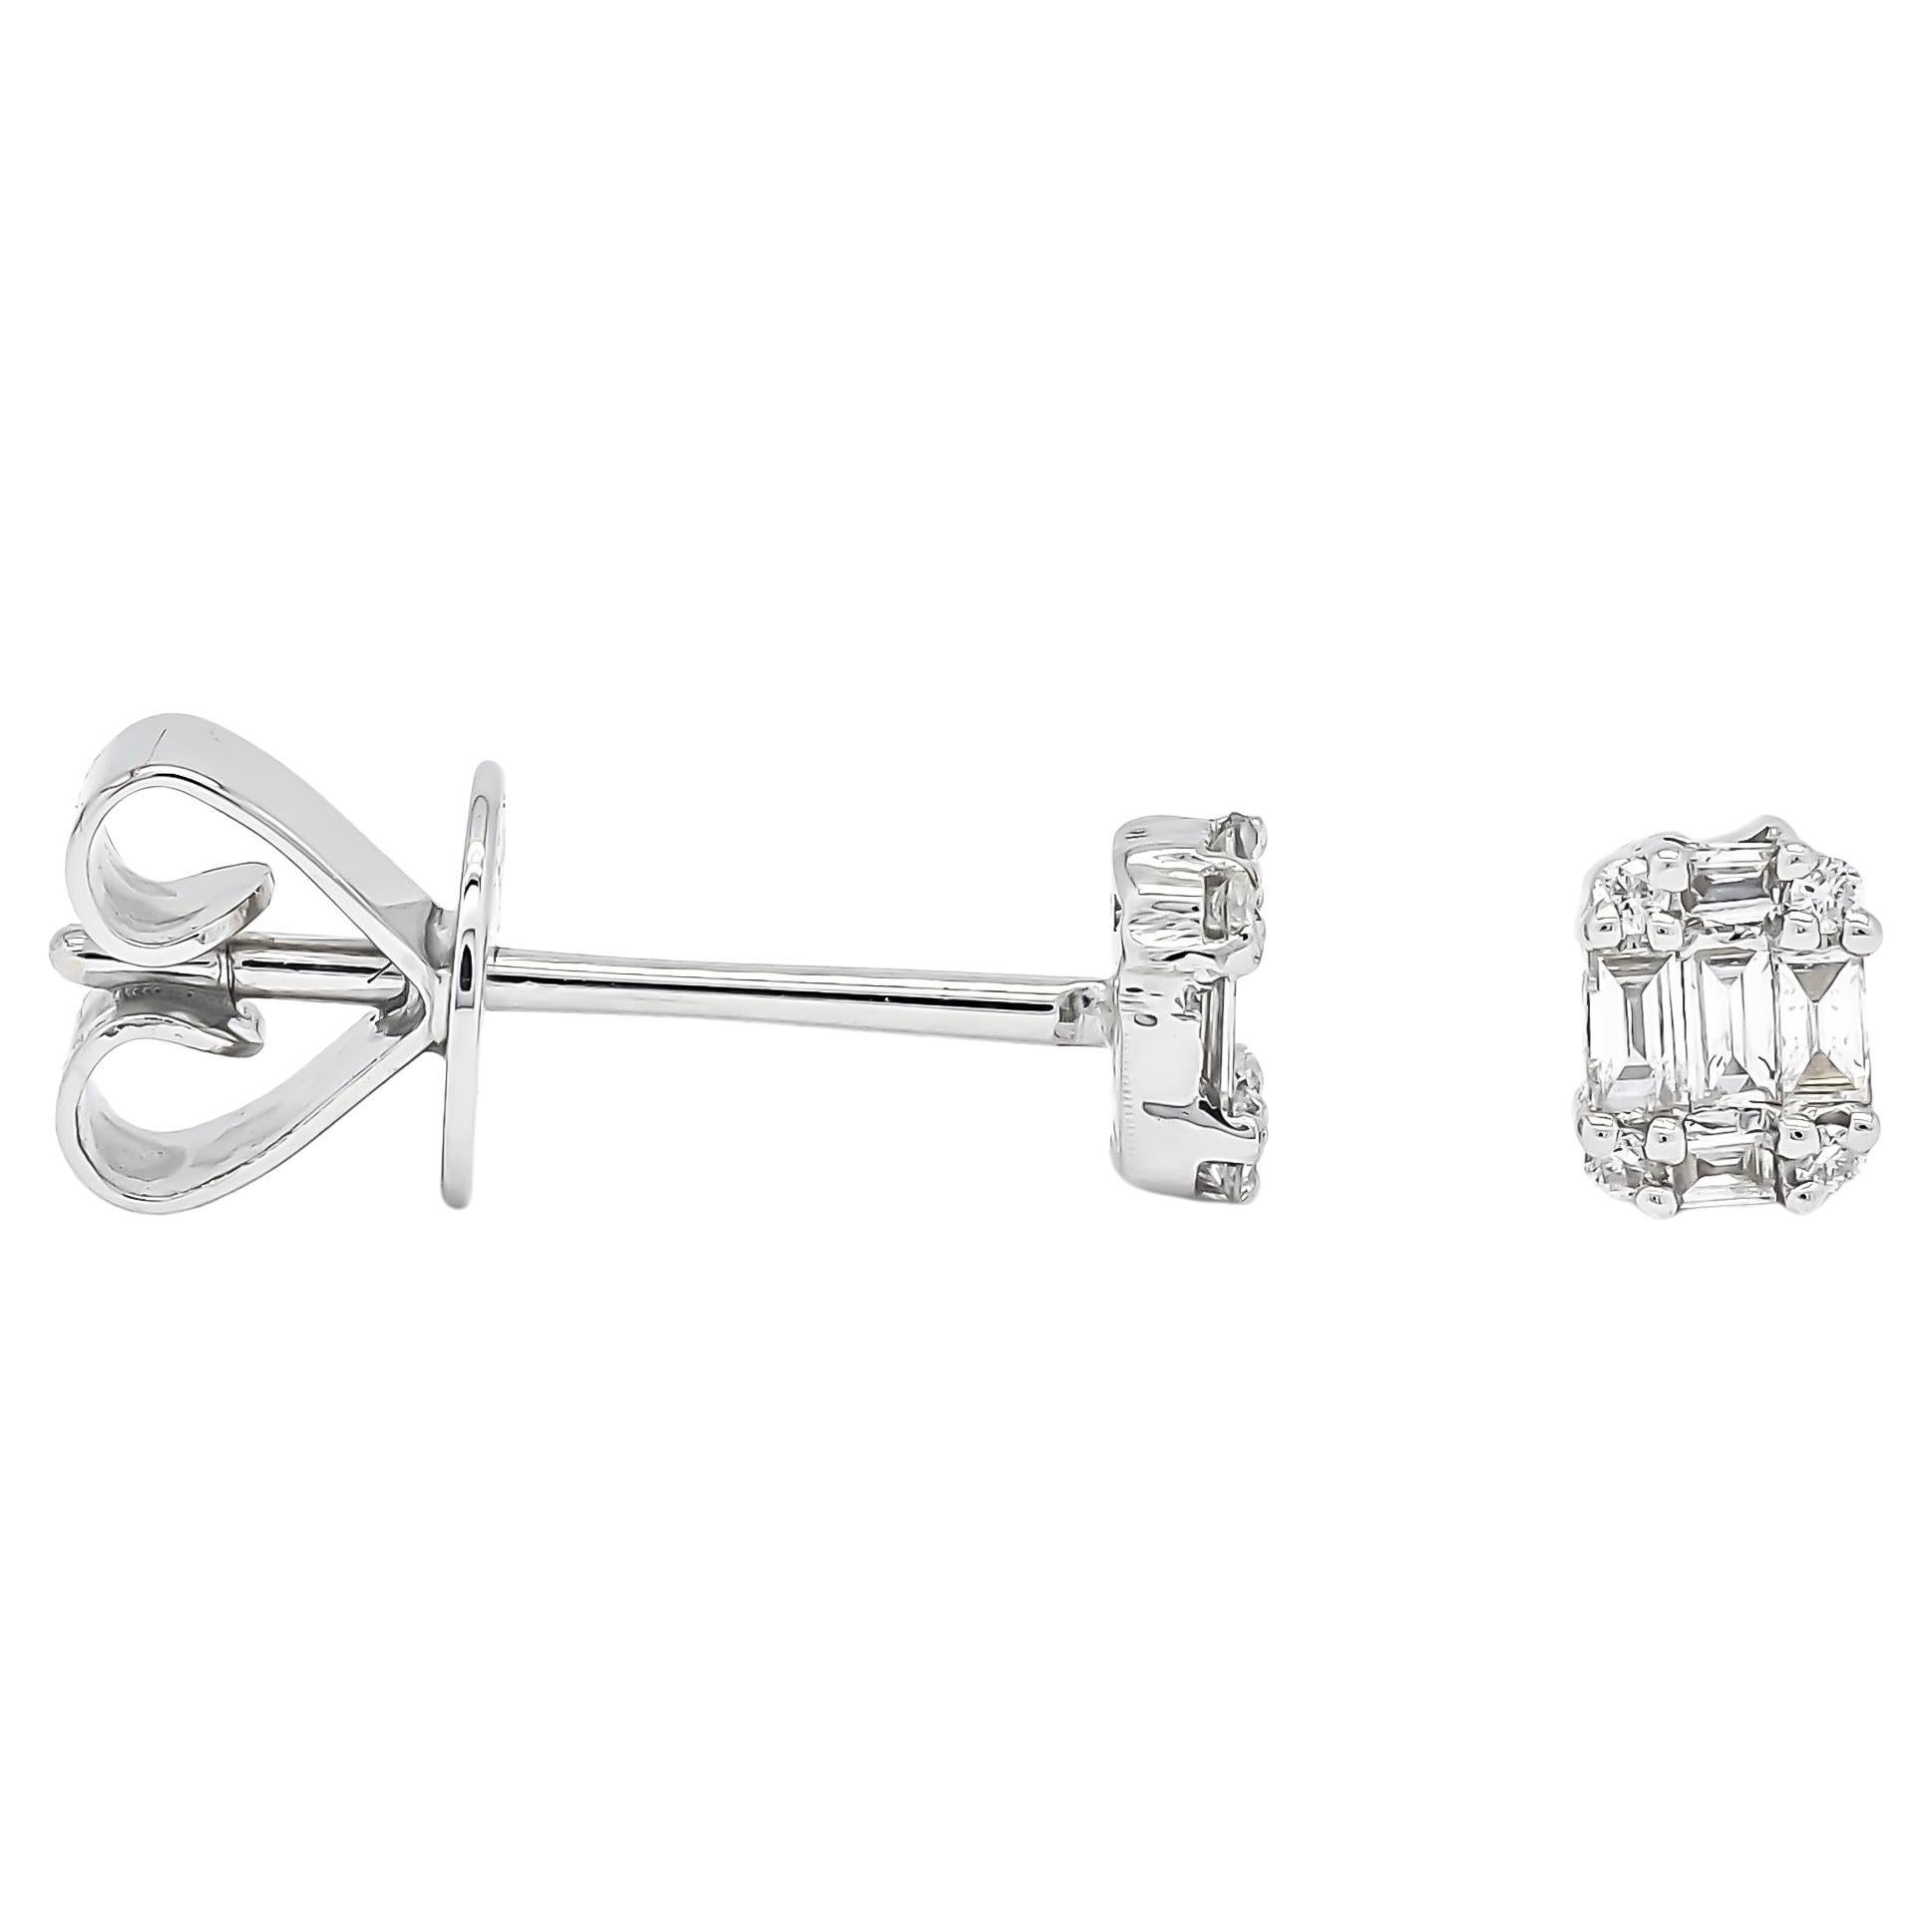 Elevate your jewelry collection with the timeless sophistication of our Natural Baguette Diamond Cluster Stud Earrings. These exquisite earrings are meticulously crafted to enhance your style with a blend of elegance and ethical luxury.

Featuring a